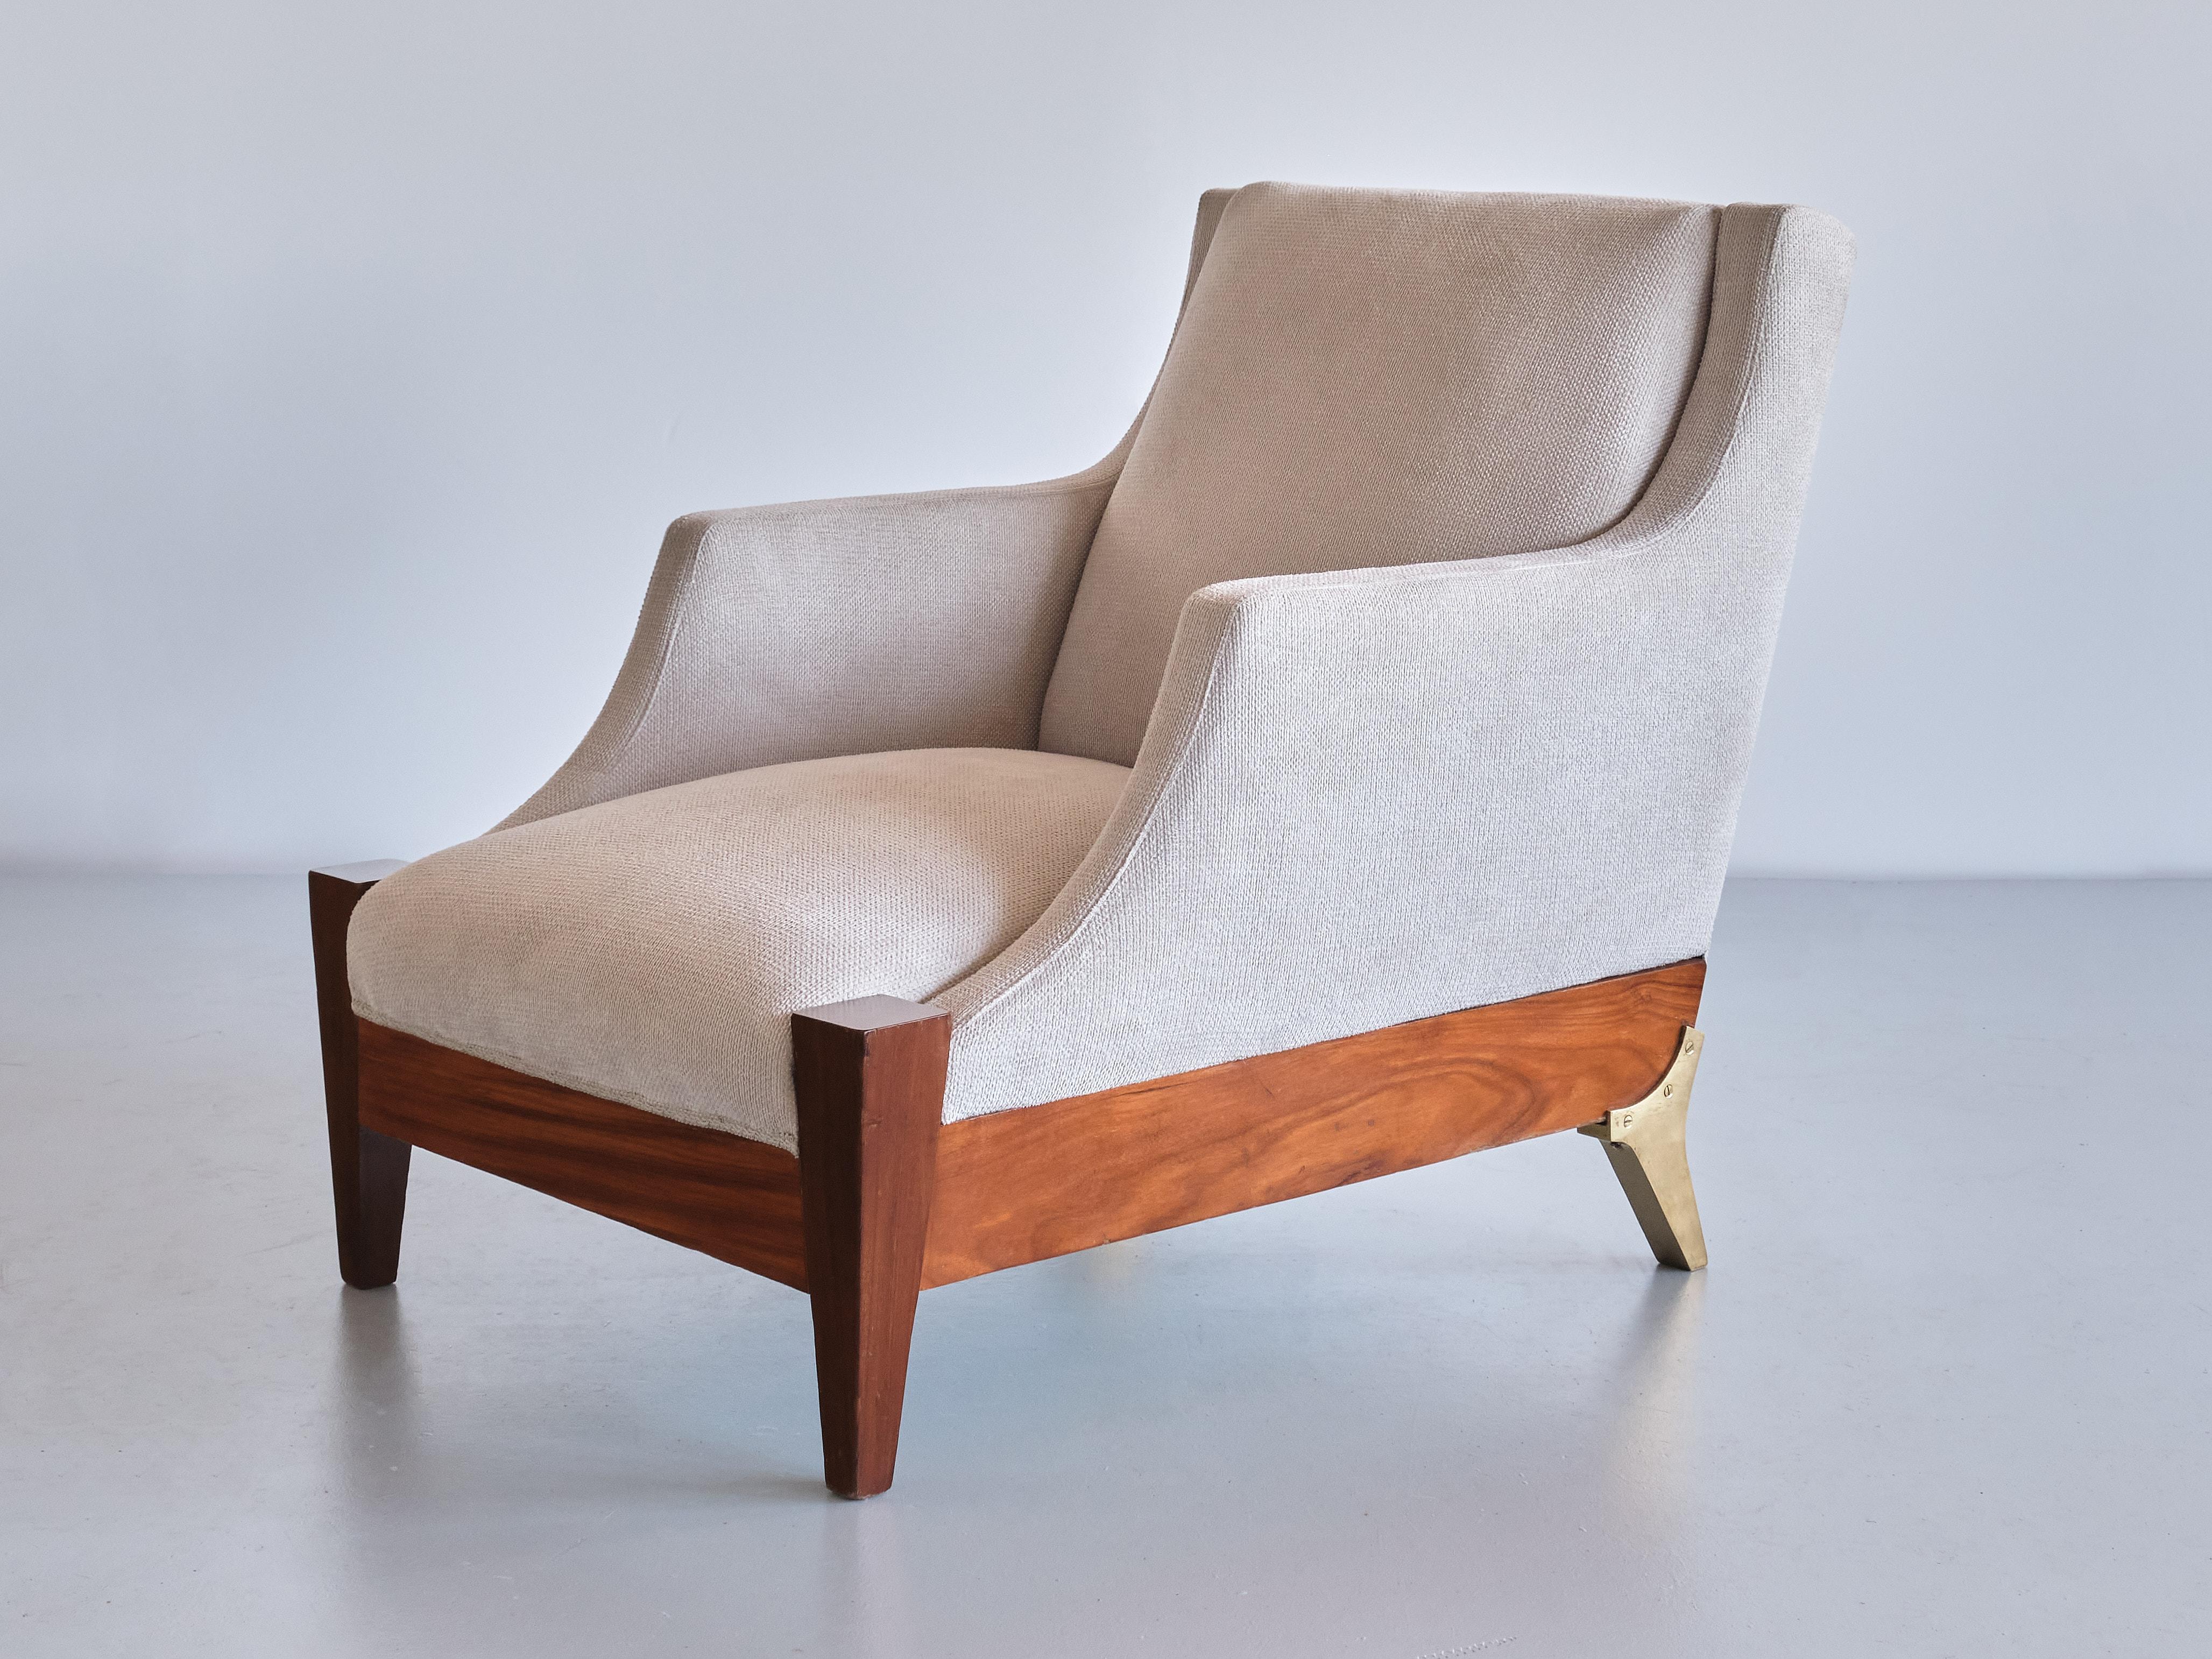 Pair of Melchiorre Bega Armchairs in Walnut, Brass, Ivory Fabric, Italy, 1940s 5